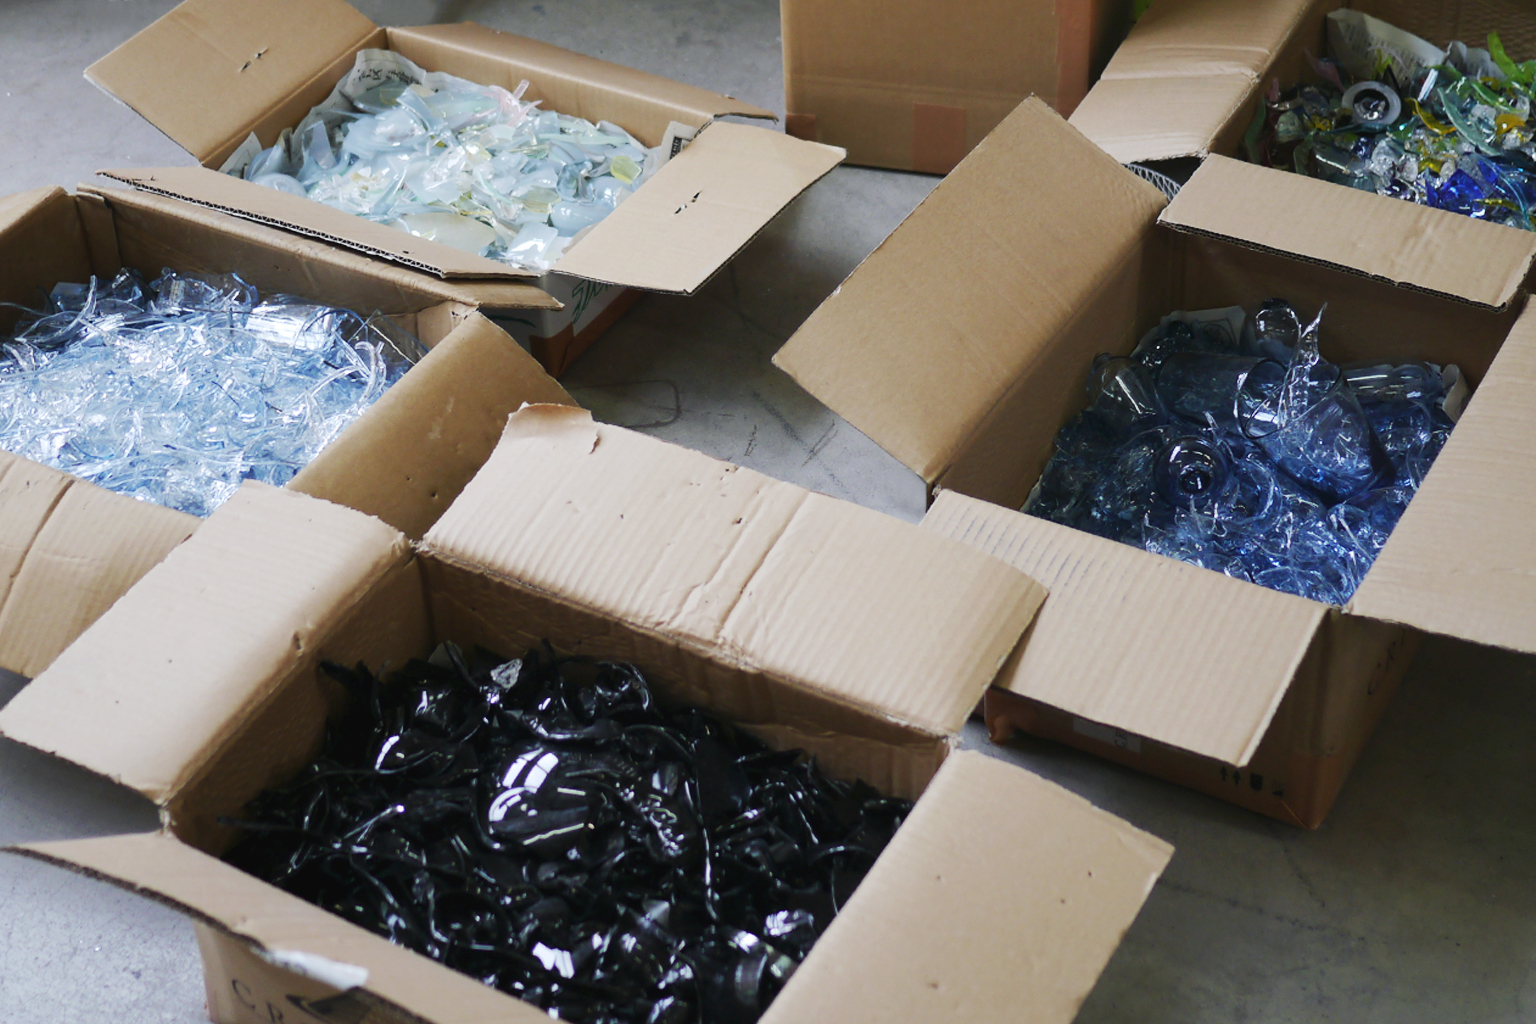 Boxes of recycled light blue glass shards